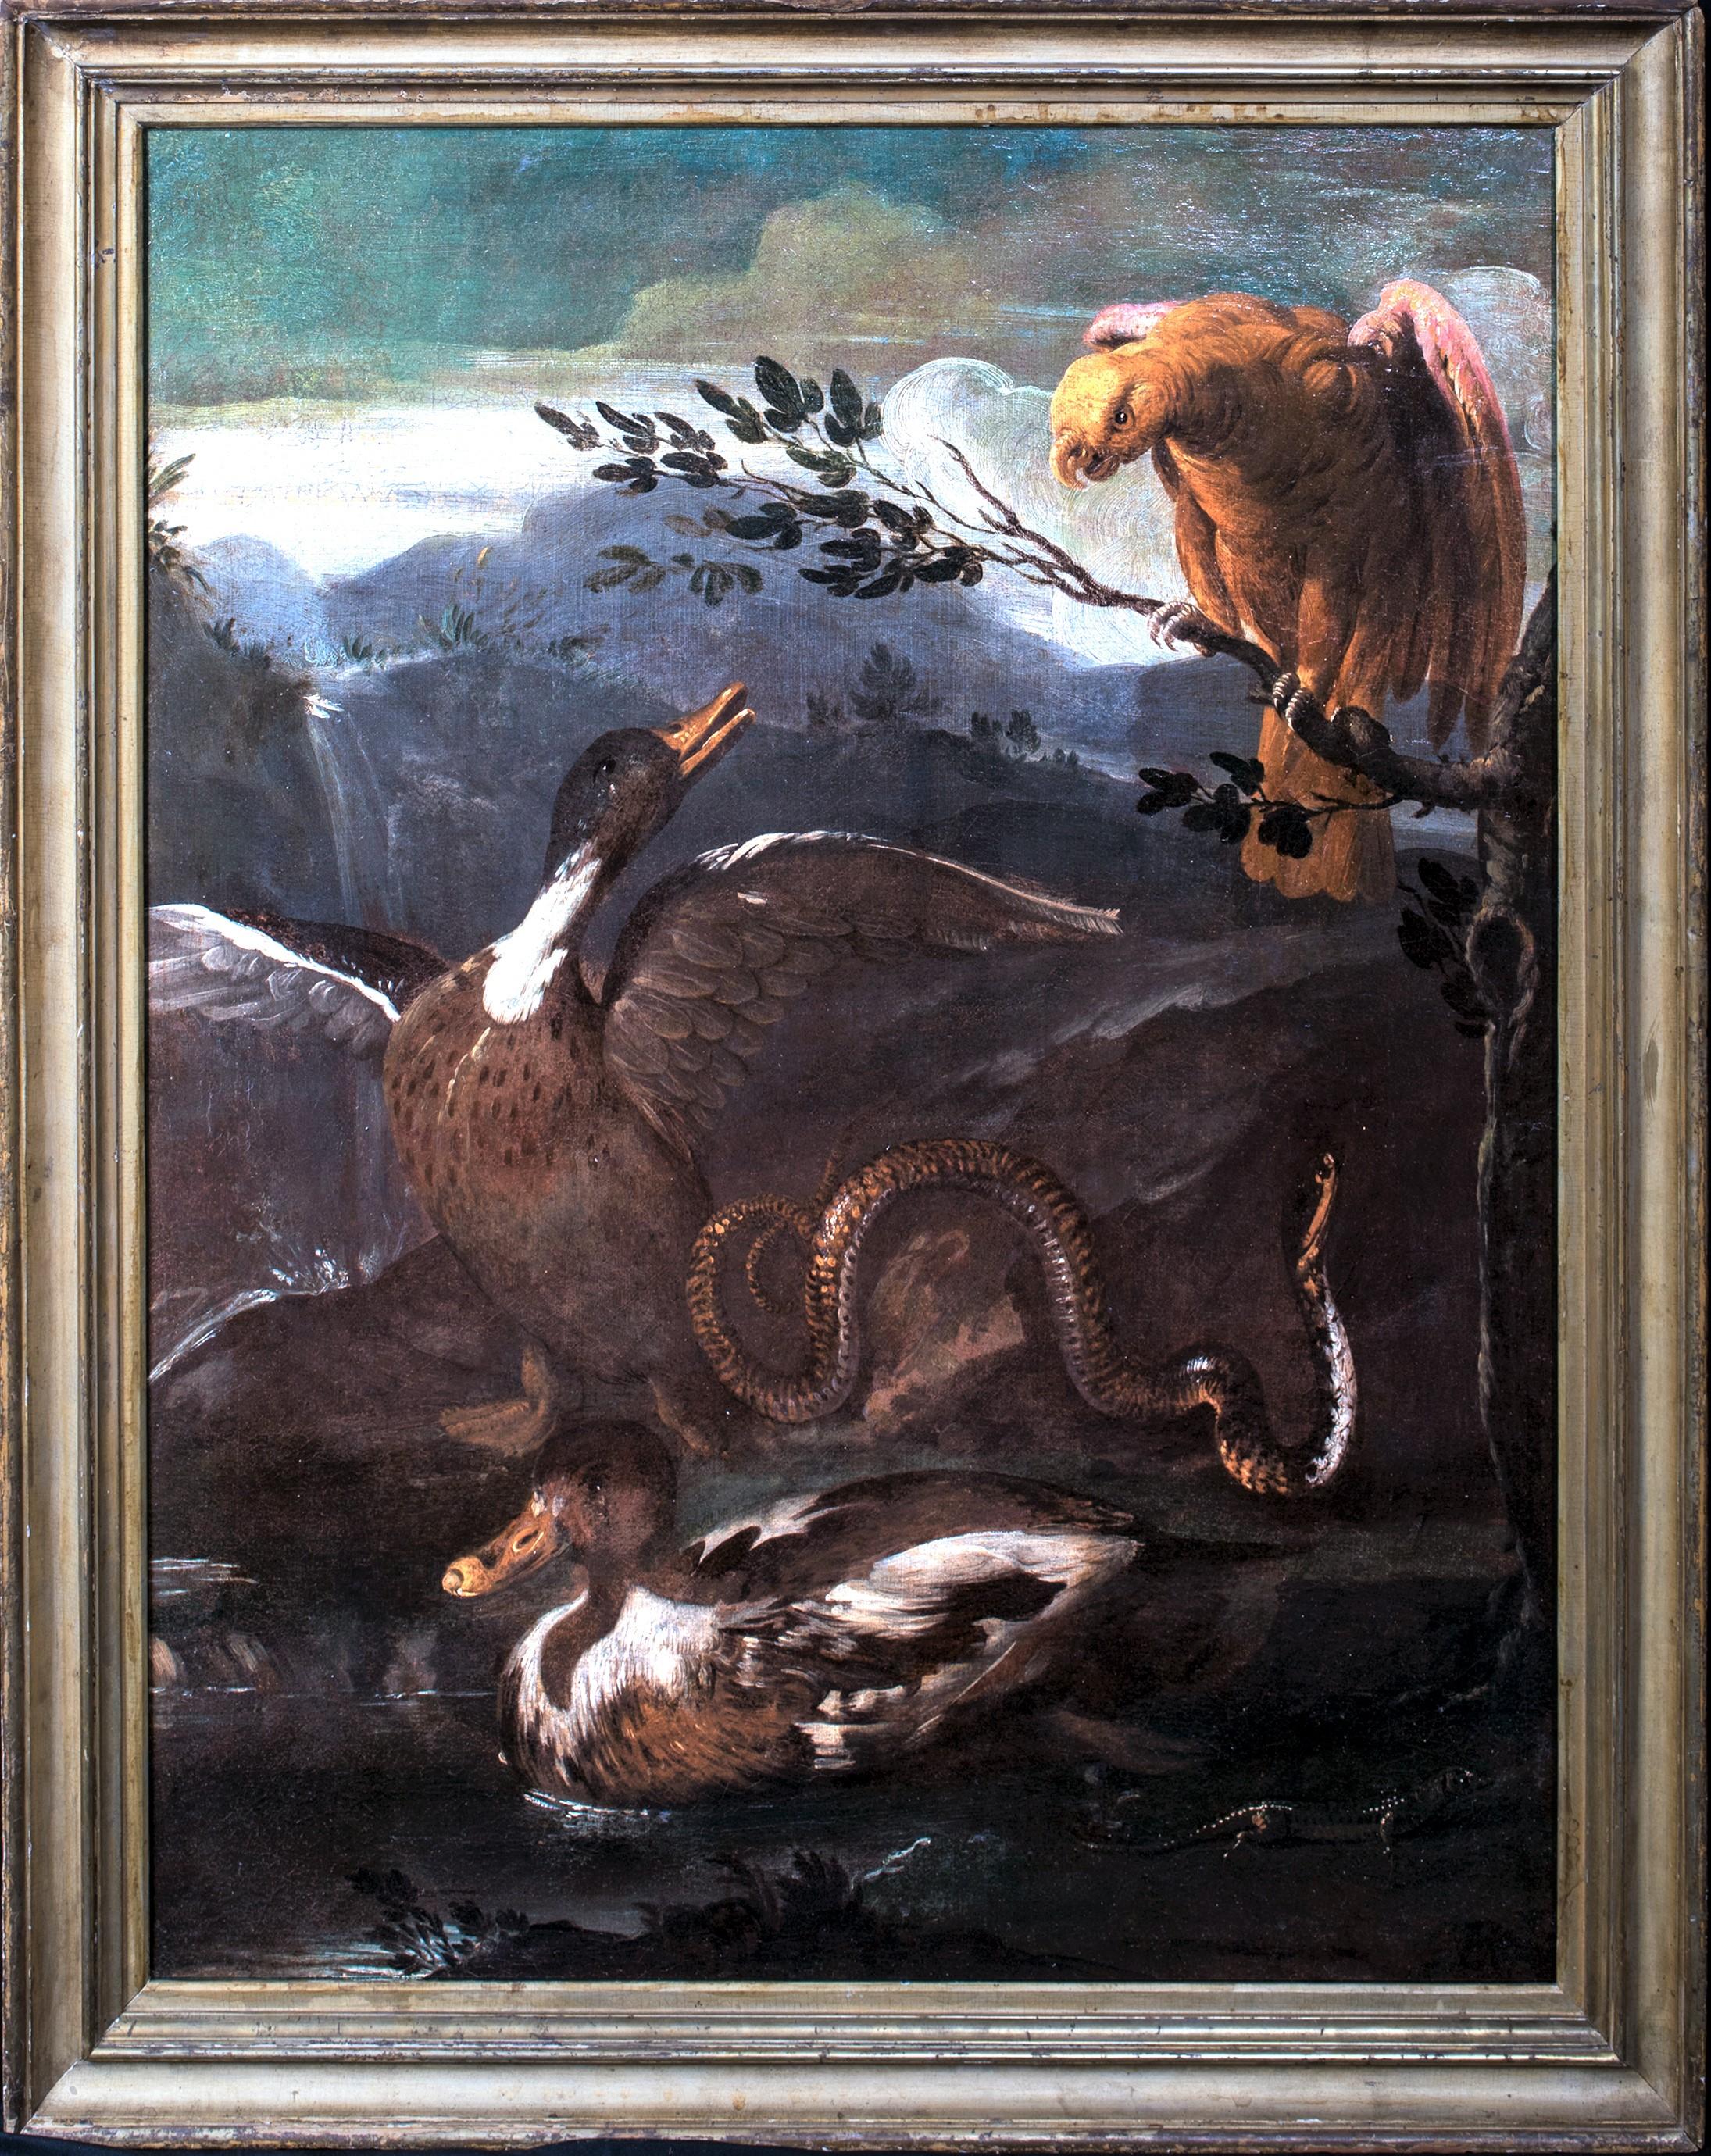 Parrot, Snake, Lizard and Ducks, 17th Century  Genoese School - Painting by Unknown